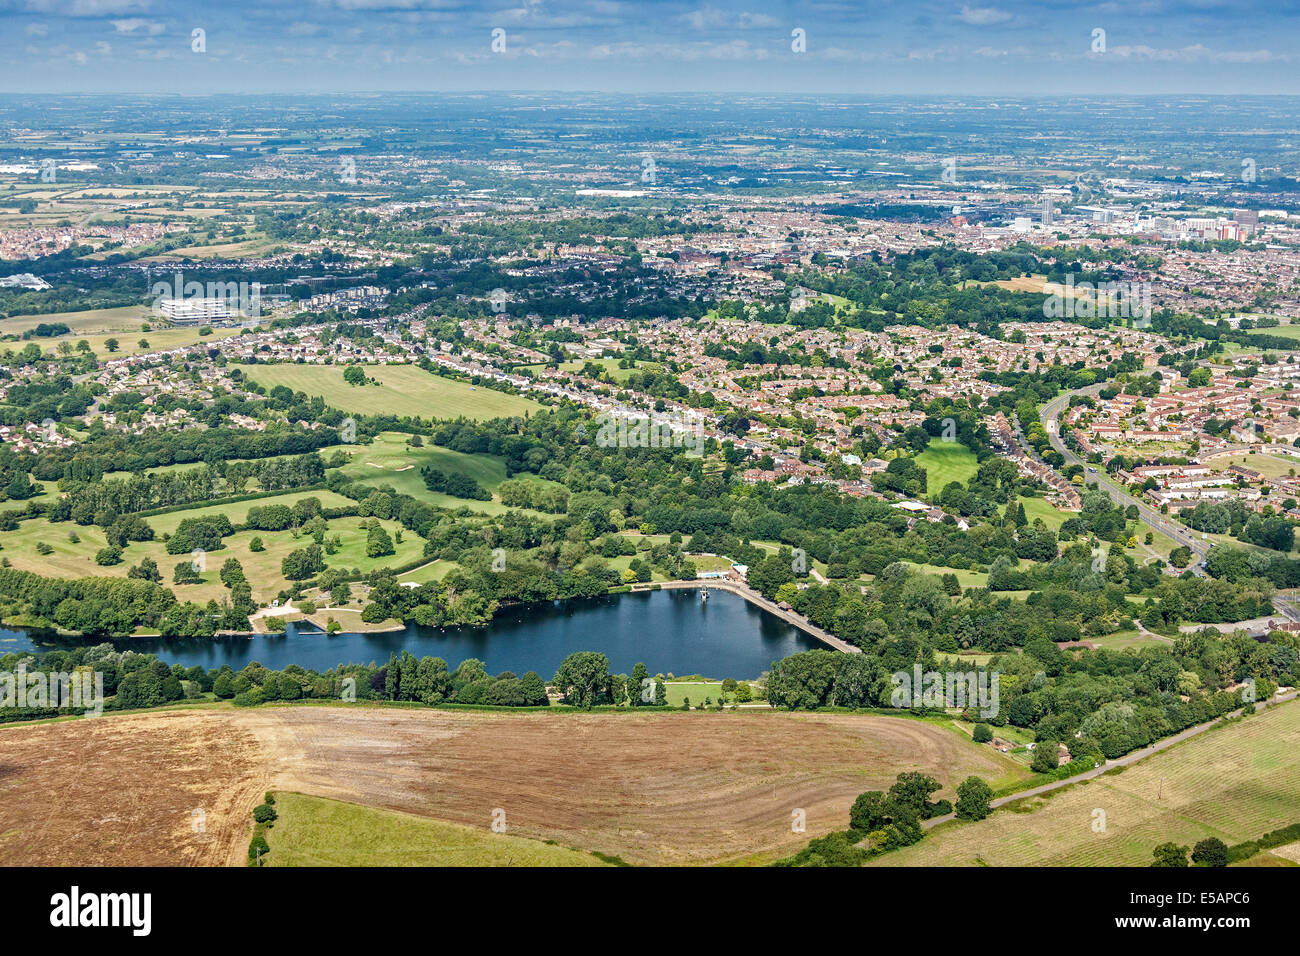 Aerial view of Coate Water Country Park looking towards Swindon Wiltshire, UK. JMH6223 Stock Photo